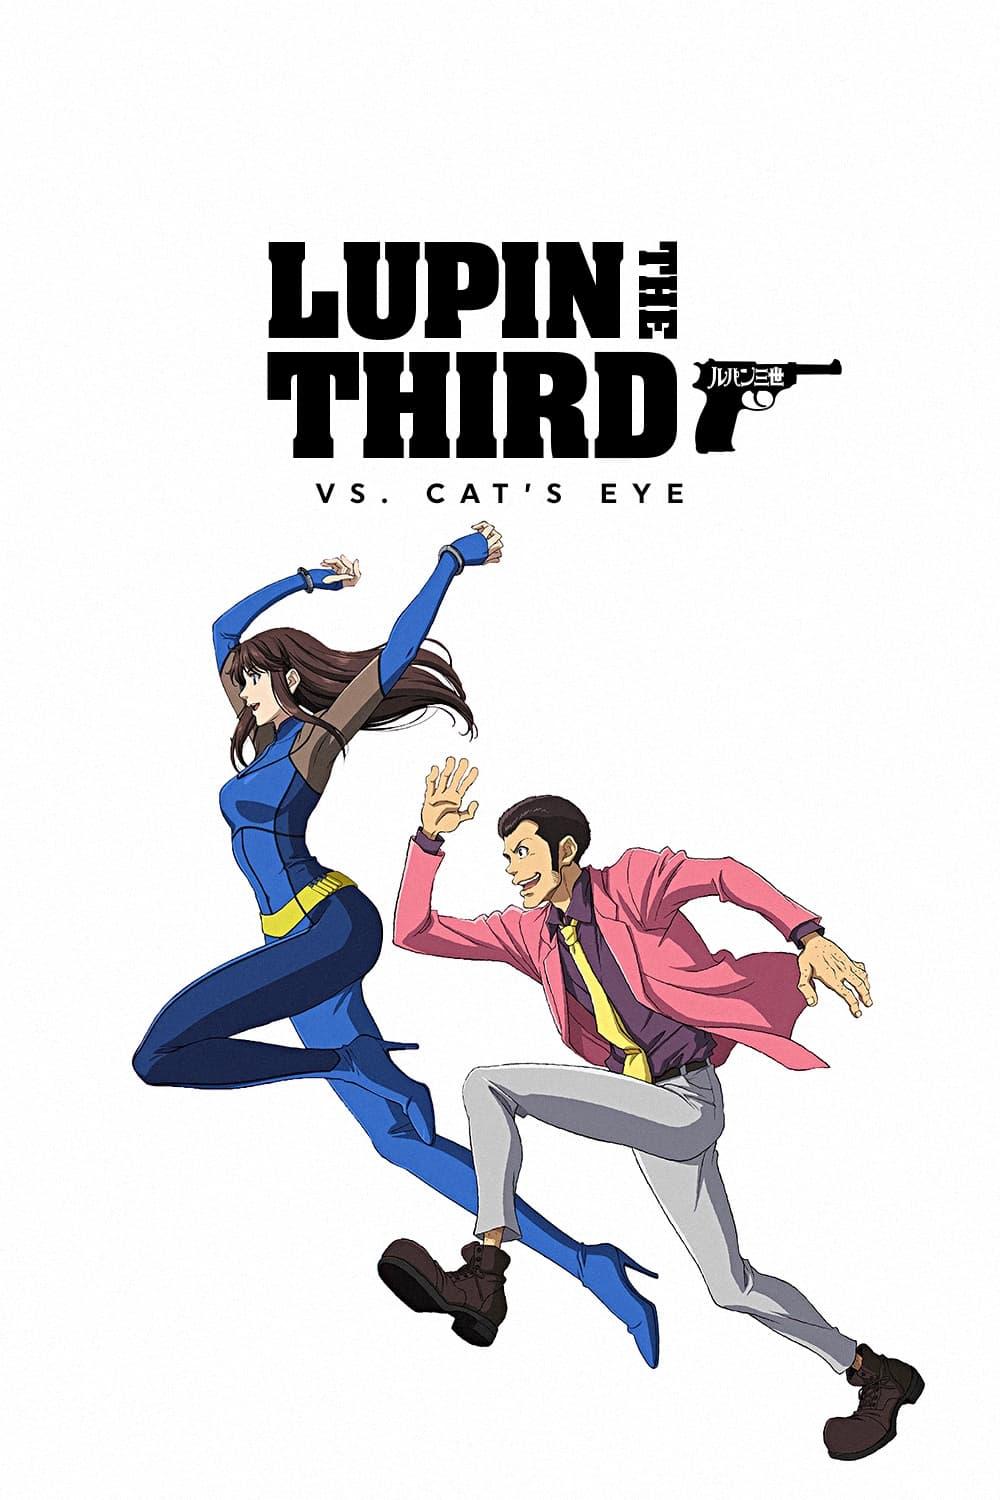 LUPIN THE 3rd vs. CAT'S EYE poster